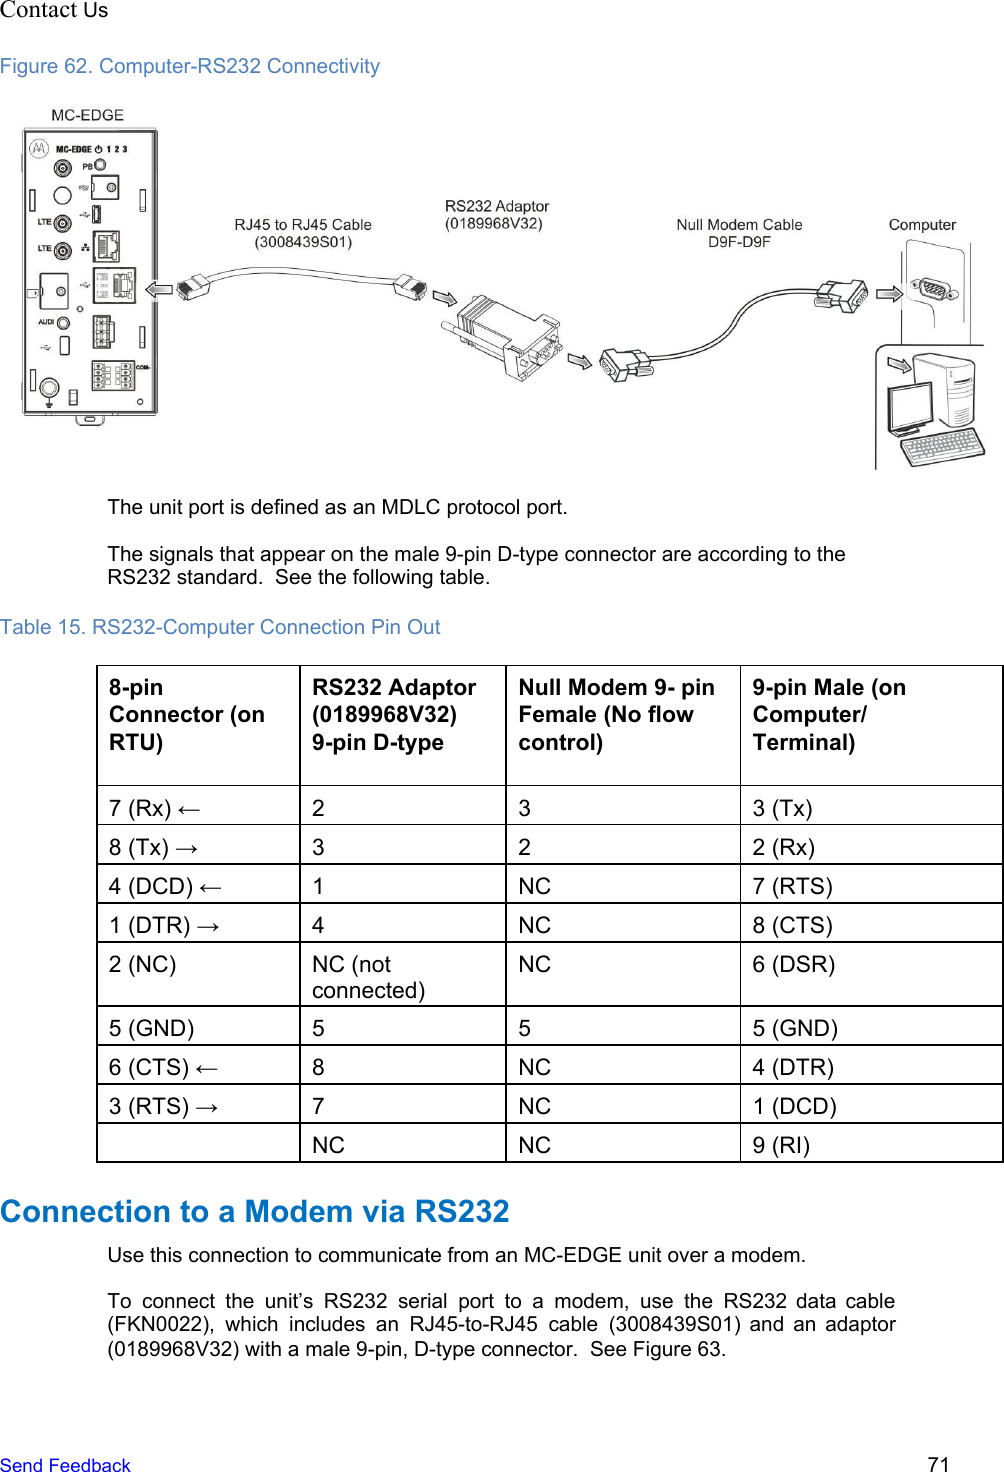 Contact Us  Figure 62. Computer-RS232 Connectivity  The unit port is defined as an MDLC protocol port. The signals that appear on the male 9-pin D-type connector are according to the RS232 standard.  See the following table. Table 15. RS232-Computer Connection Pin Out 8-pin Connector (on RTU) RS232 Adaptor (0189968V32) 9-pin D-type Null Modem 9- pin Female (No flow control) 9-pin Male (on Computer/ Terminal) 7 (Rx) ← 2 3 3 (Tx) 8 (Tx) → 3 2 2 (Rx) 4 (DCD) ← 1 NC 7 (RTS) 1 (DTR) → 4 NC 8 (CTS) 2 (NC) NC (not connected) NC 6 (DSR) 5 (GND) 5 5 5 (GND) 6 (CTS) ← 8 NC 4 (DTR) 3 (RTS) → 7 NC 1 (DCD) NC NC 9 (RI) Connection to a Modem via RS232 Use this connection to communicate from an MC-EDGE unit over a modem. To connect the unit’s RS232 serial port to a modem, use the RS232 data cable                             (FKN0022), which includes an RJ45-to-RJ45 cable (3008439S01) and an adaptor                   (0189968V32) with a male 9-pin, D-type connector.  See Figure 63.  Send Feedback  71 